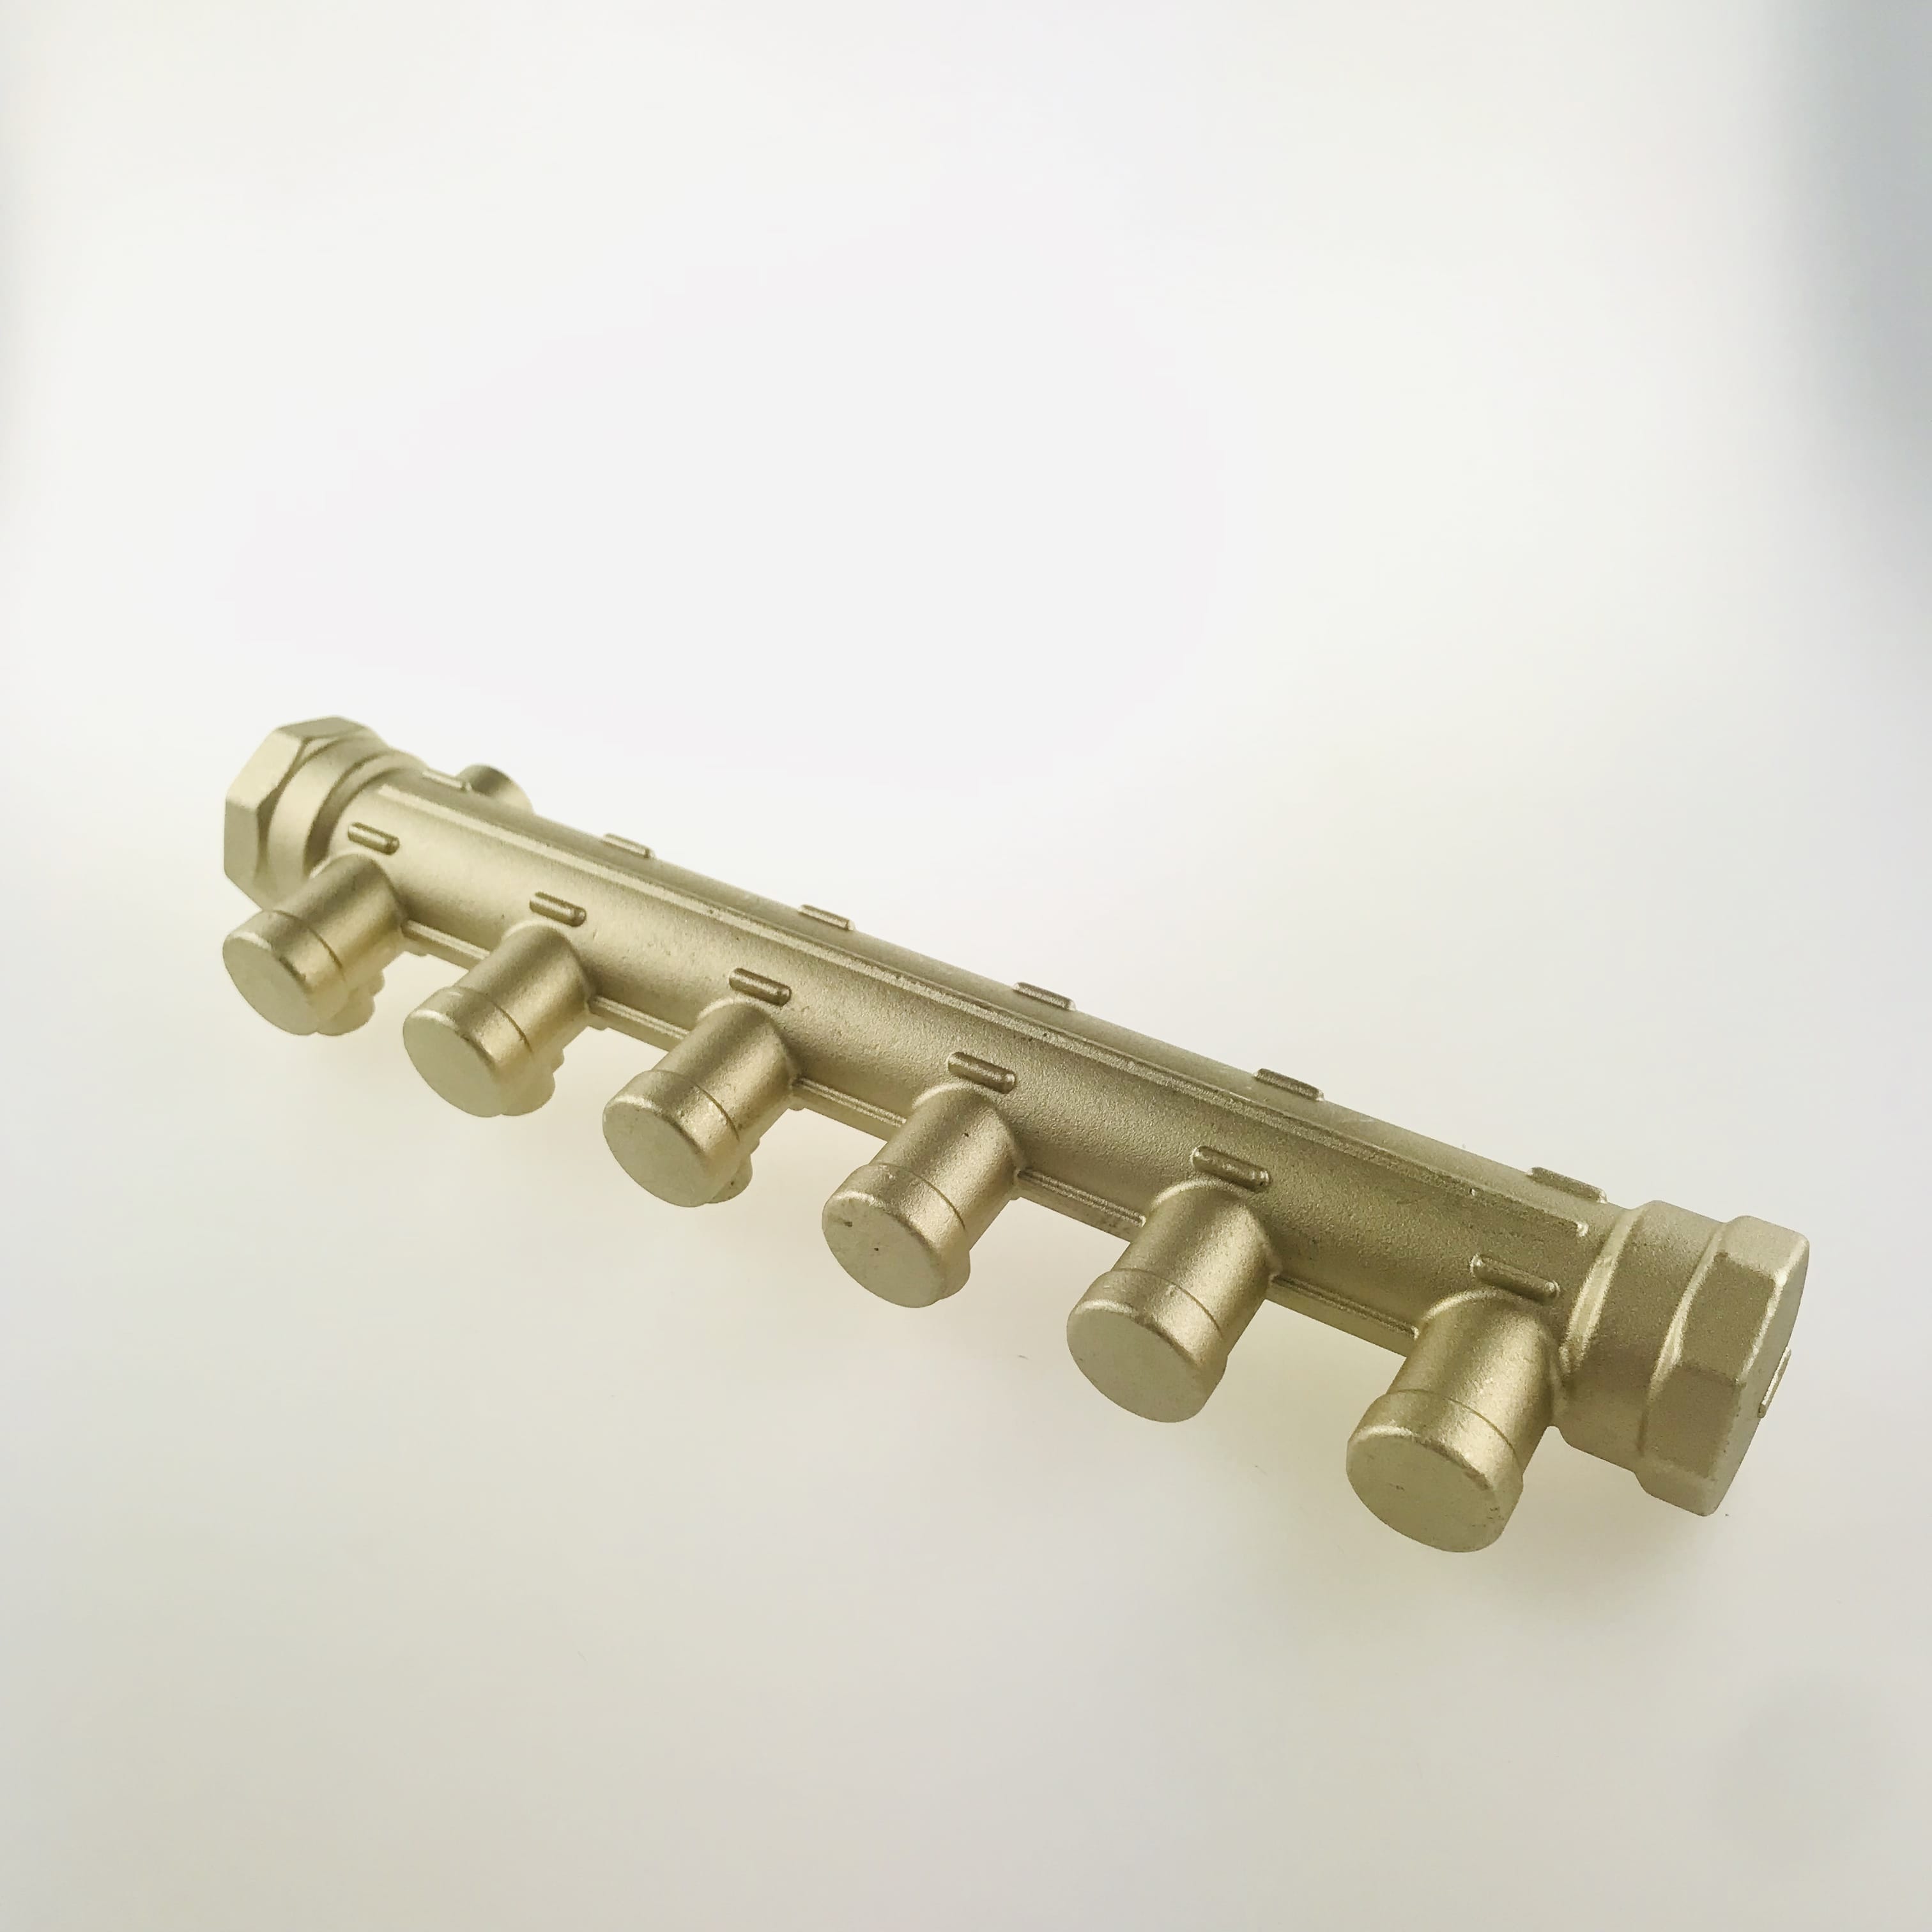 Forged High Pressure <a href='/brass-plumbing-fitting/'>Brass Plumbing Fitting</a>s - Customizable OEM Solutions from Factory